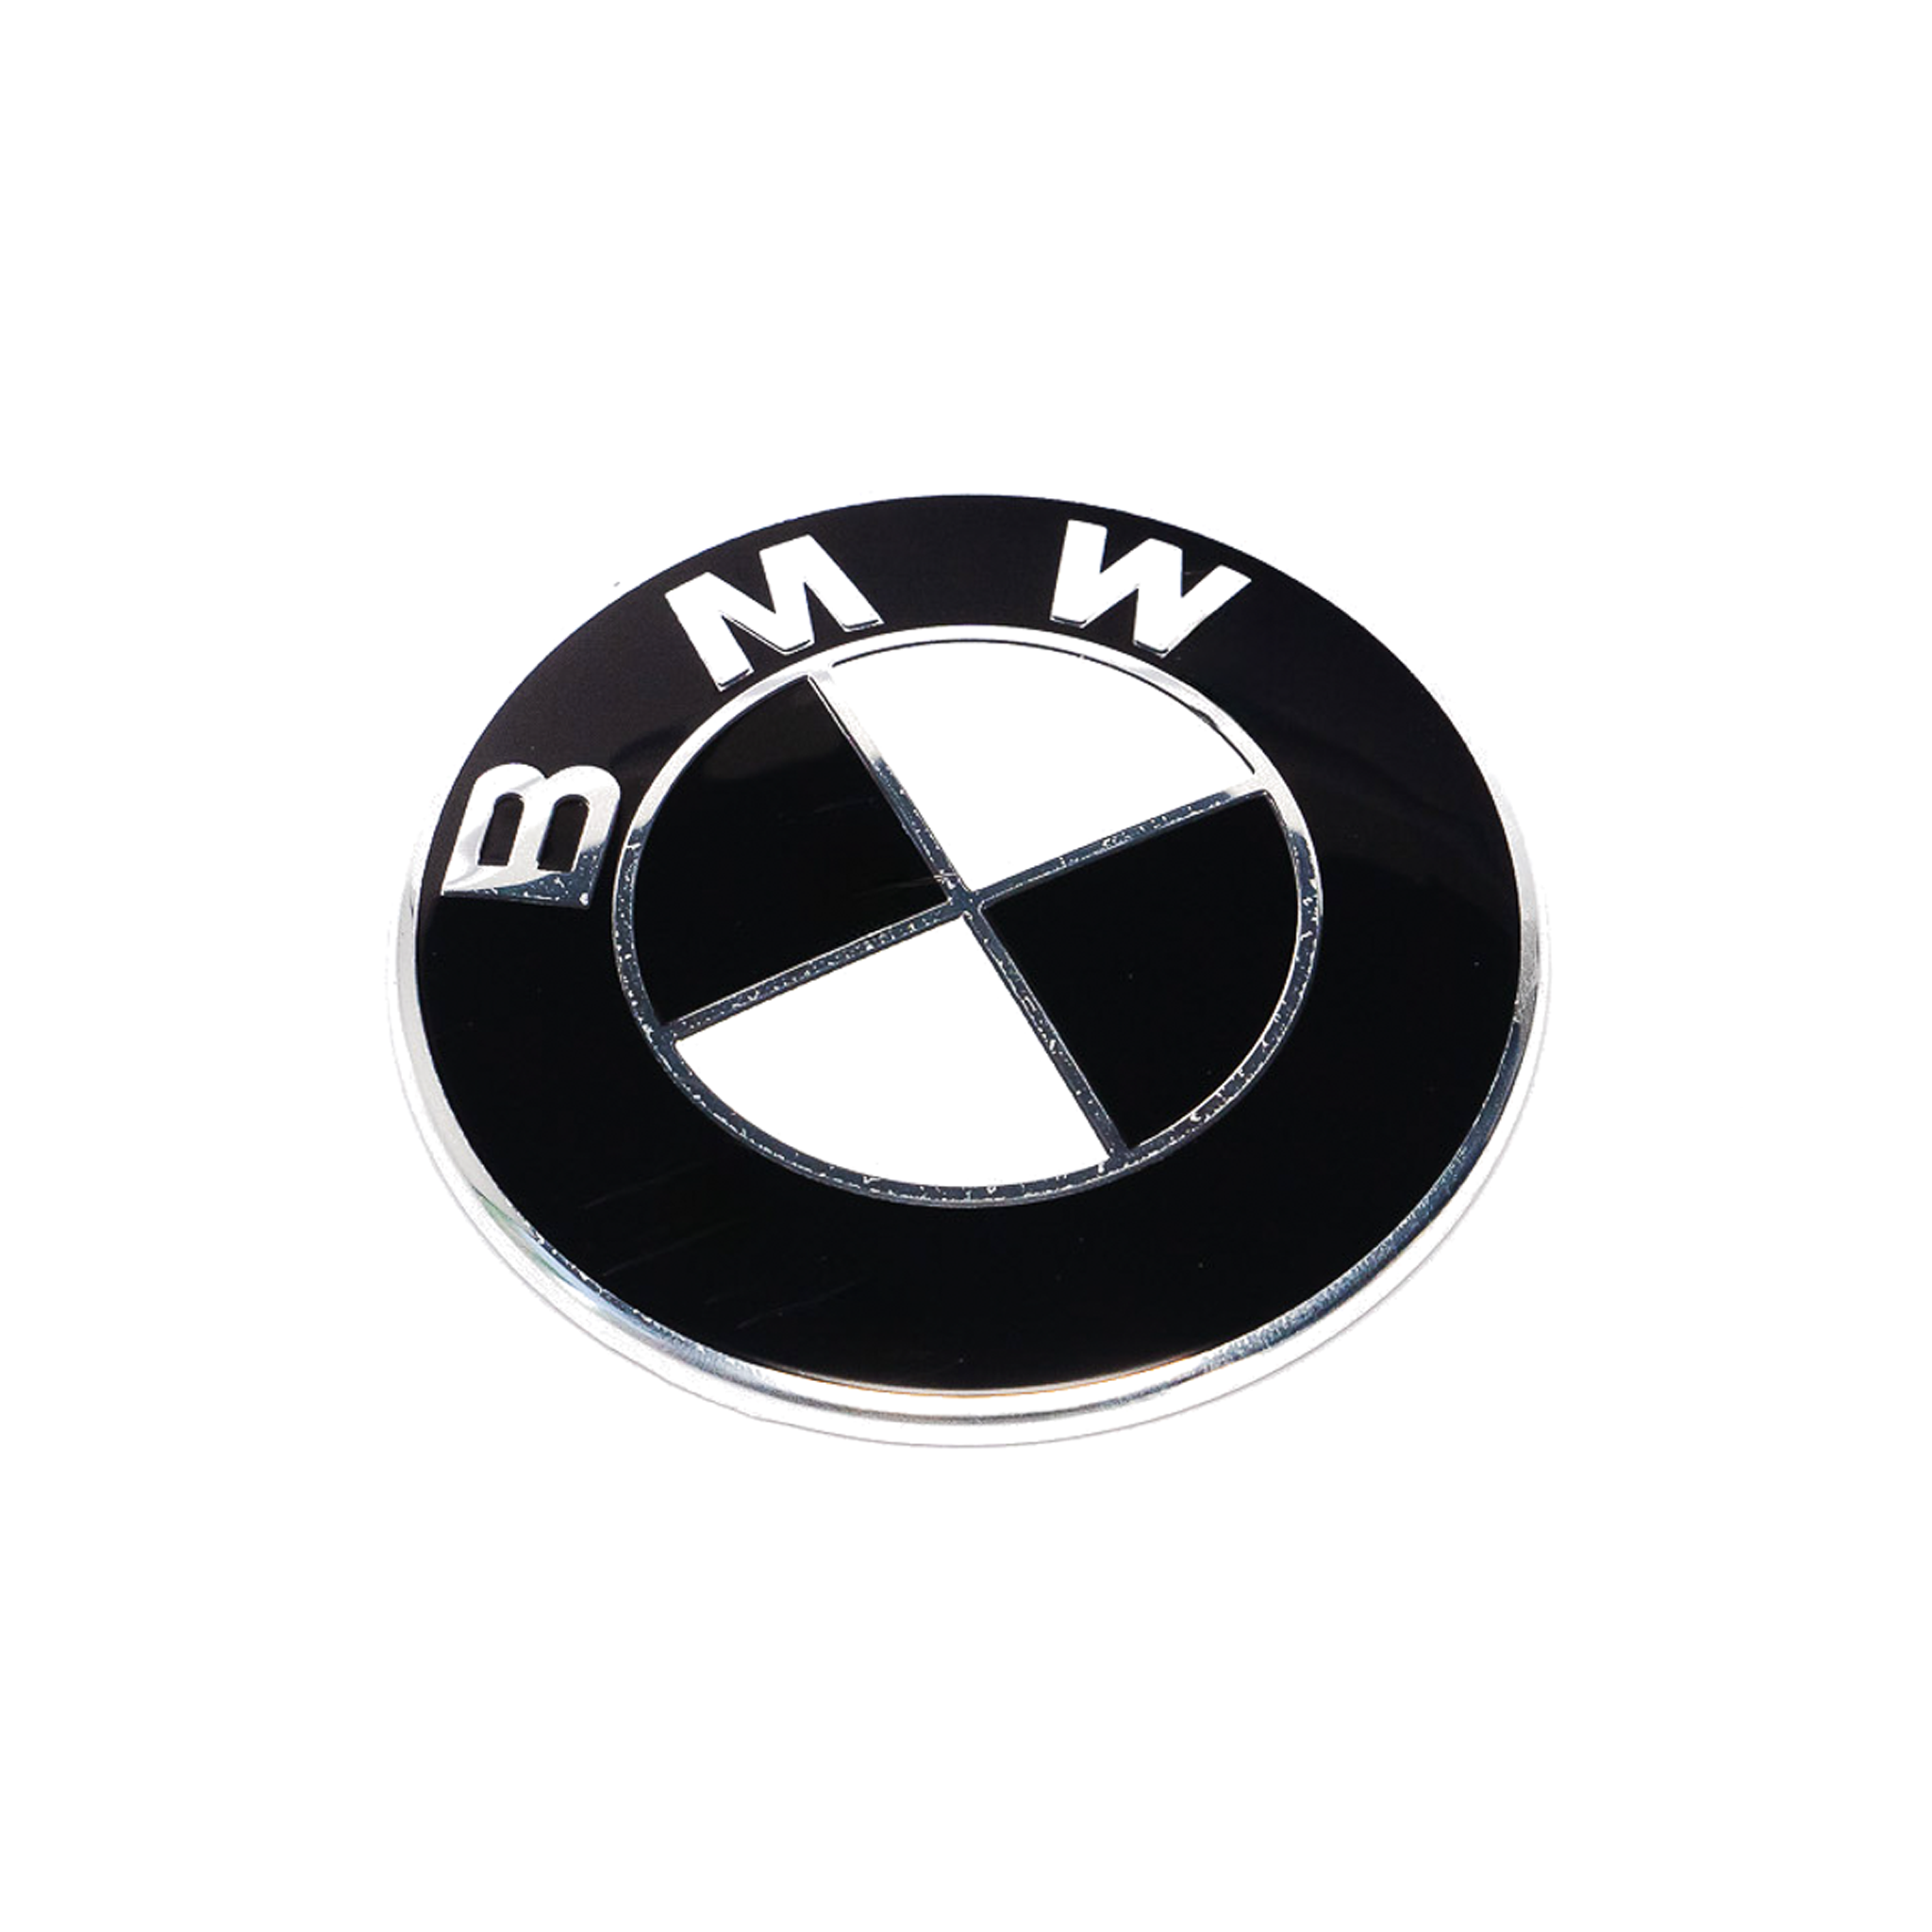 Exon BMW Style Stealth Black / White Front Badge Emblem 82mm for BMW F-Series M2 F87 M3 F80 M4 F82 & 1 2 3 4 Series F20 F22 F30 F32